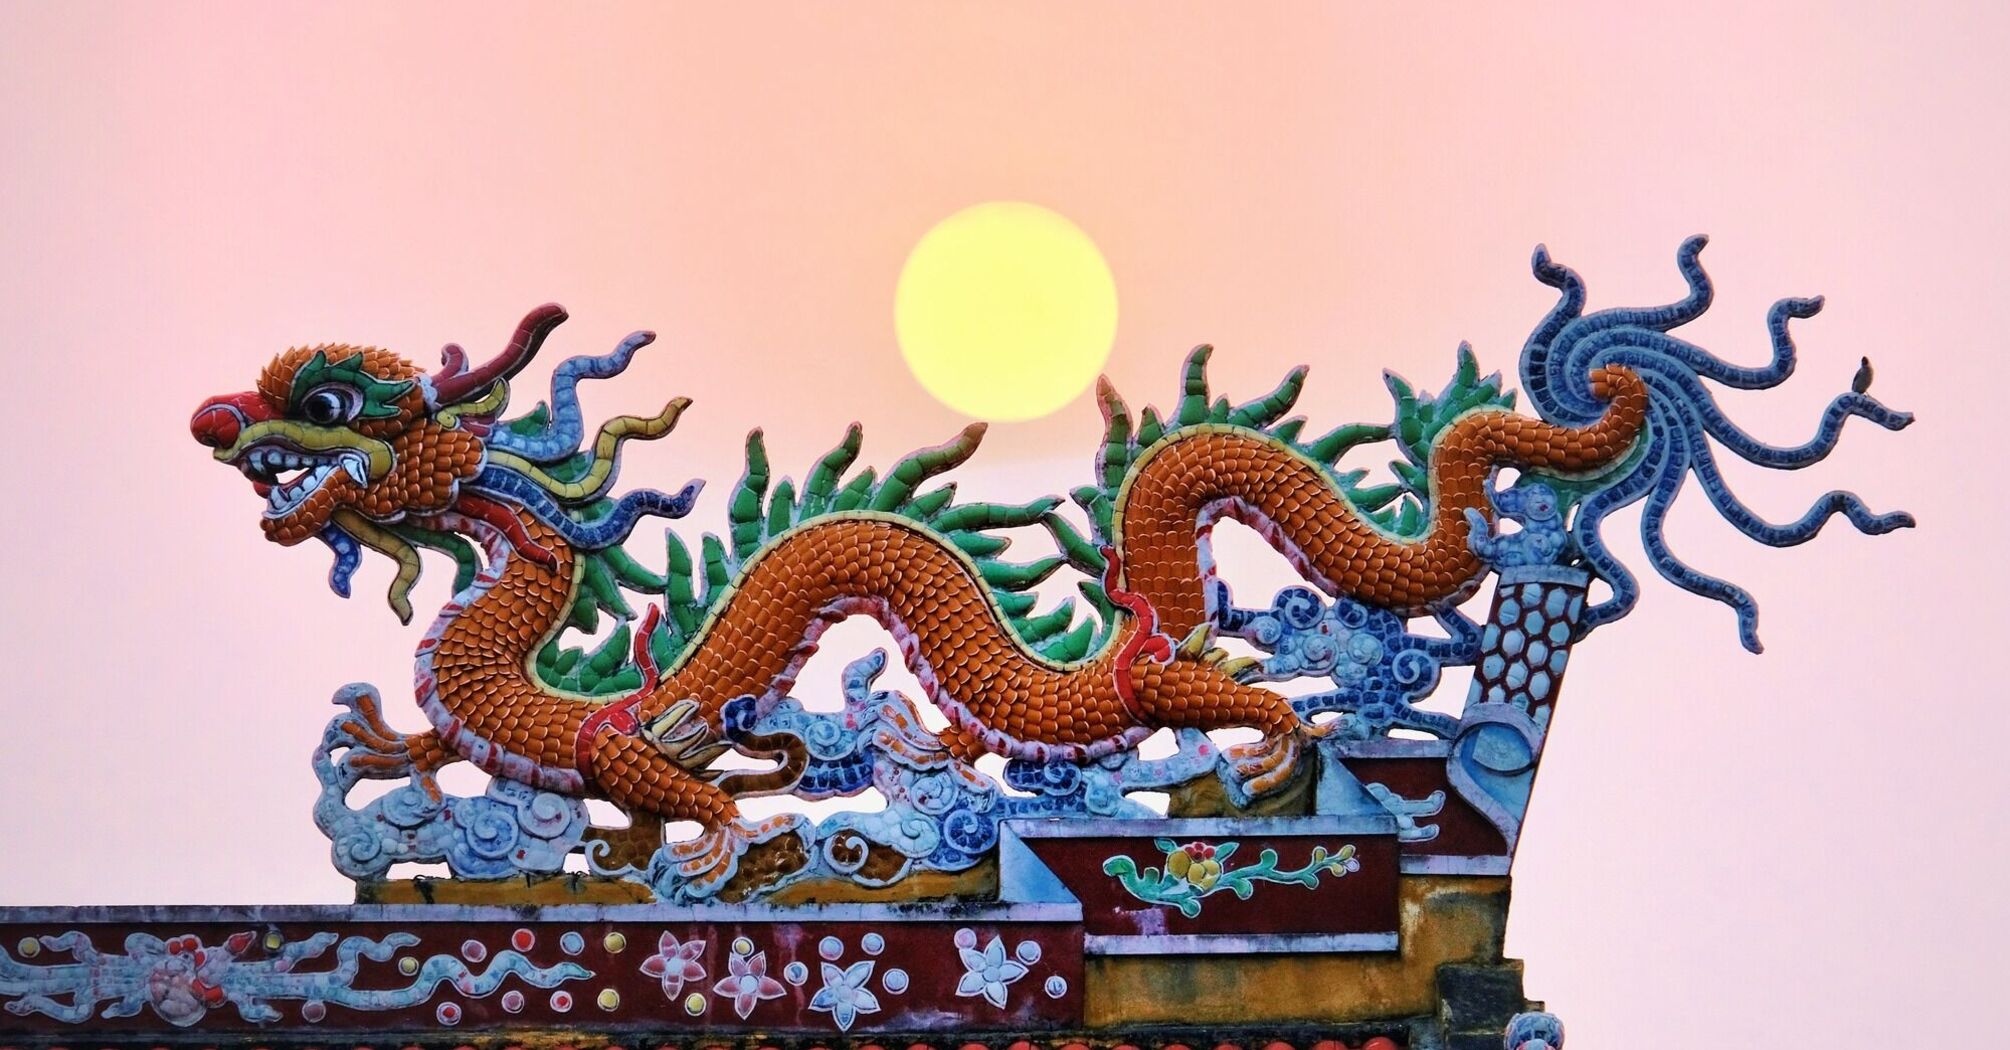 An emotional day is expected: Chinese horoscope for February 19